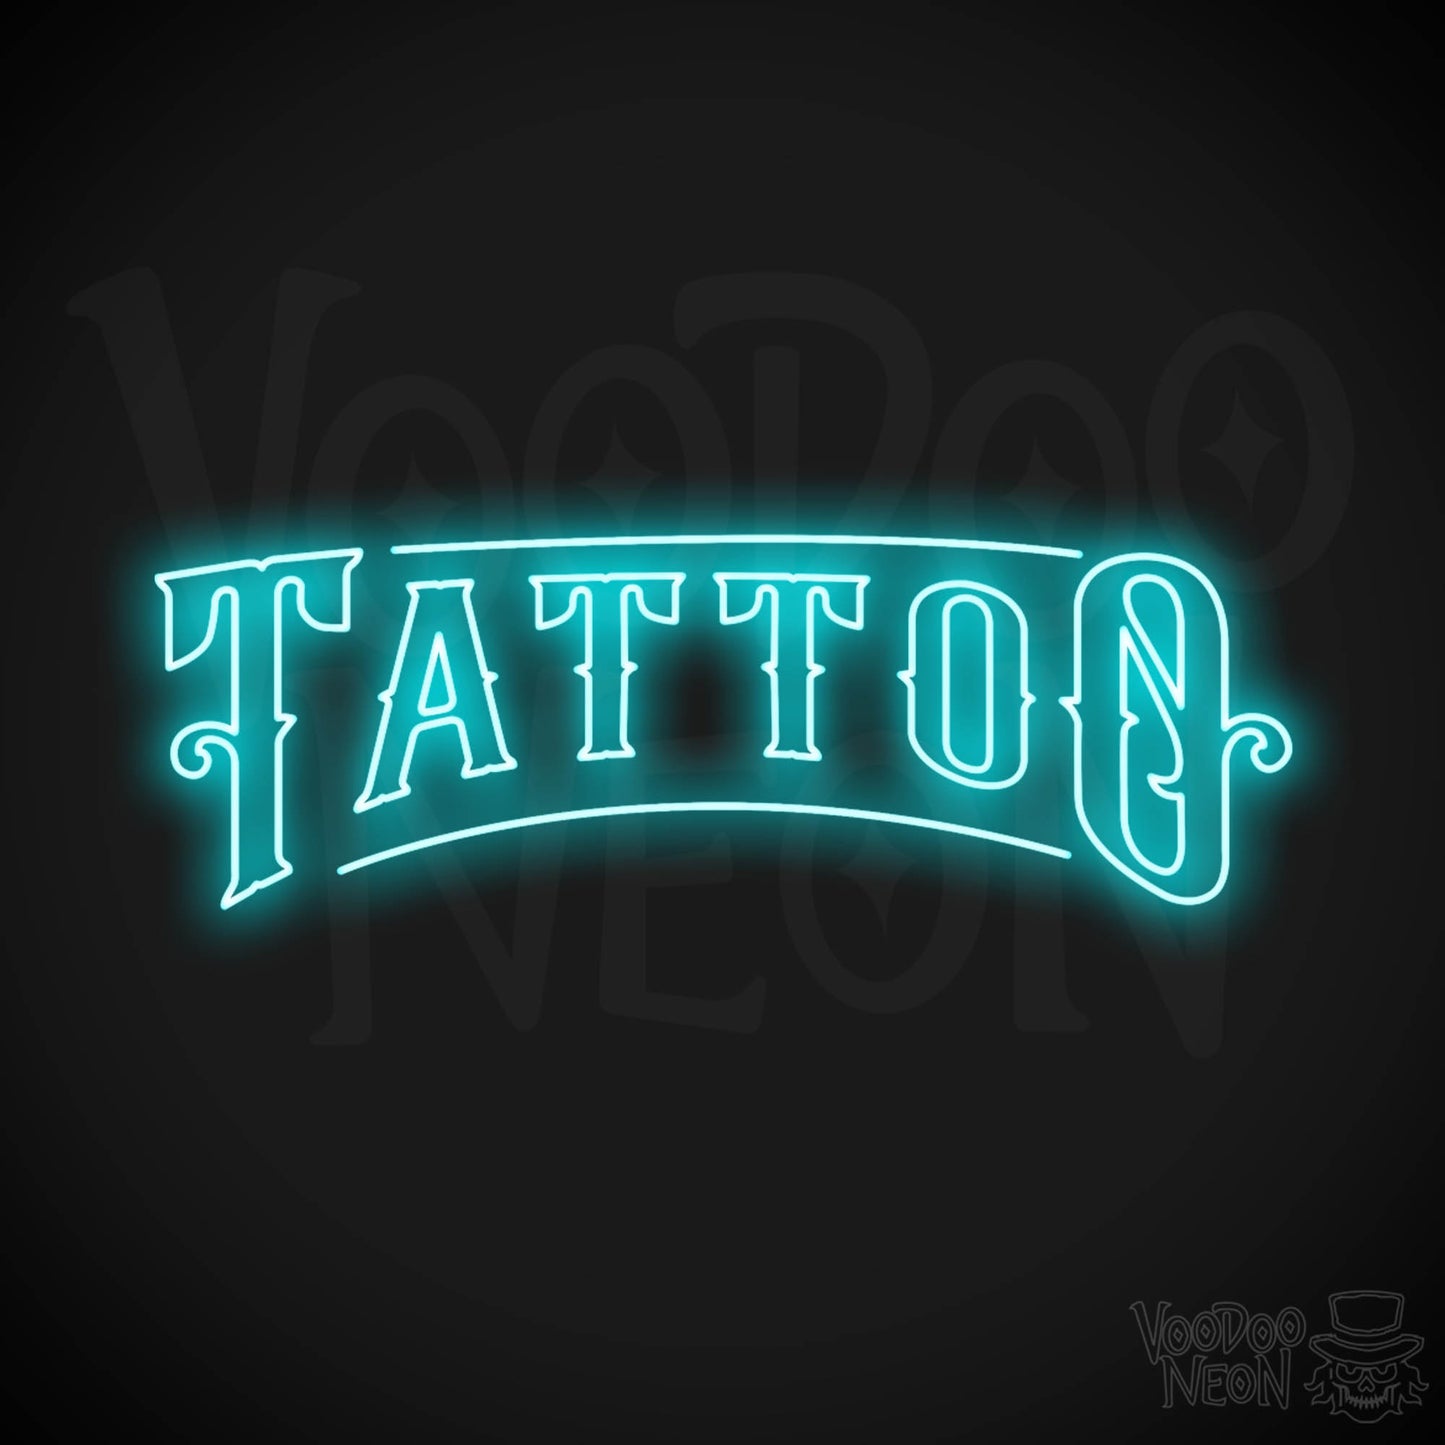 Tattoo Parlor LED Neon - Ice Blue